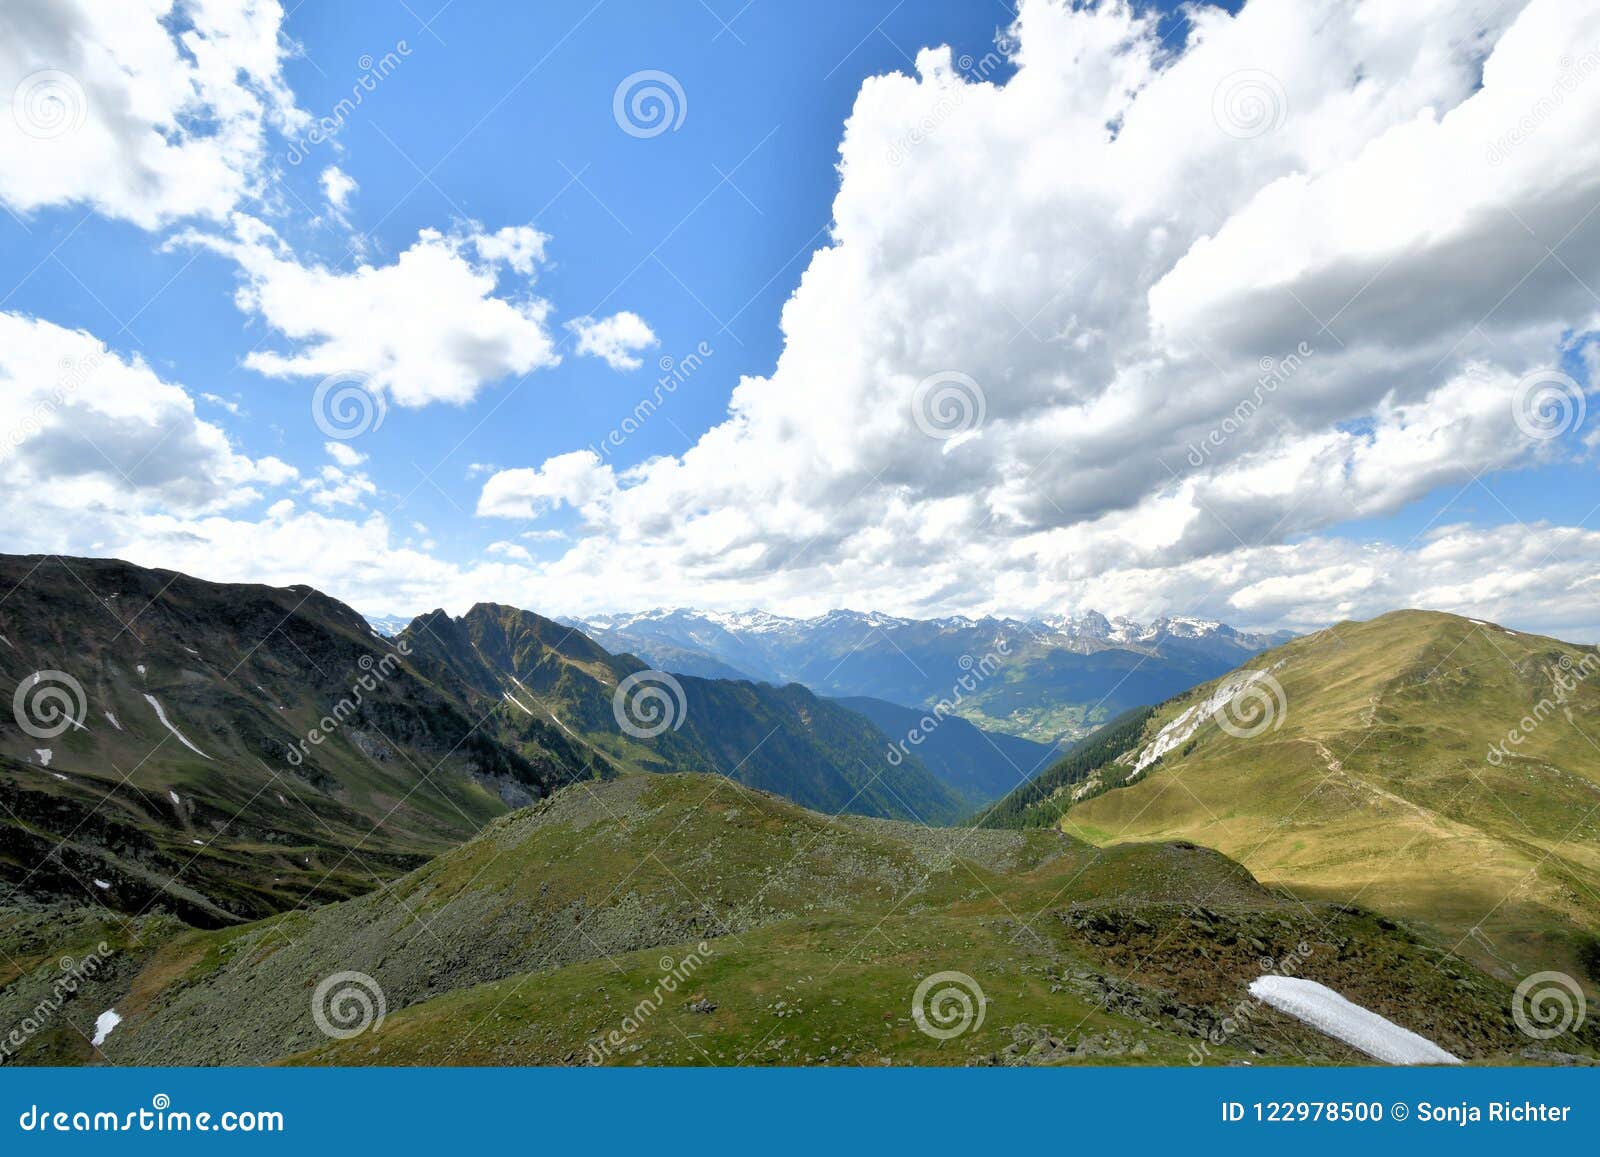 Summit Rock Panorama Landscape of the High Mountains in South Tyrol ...